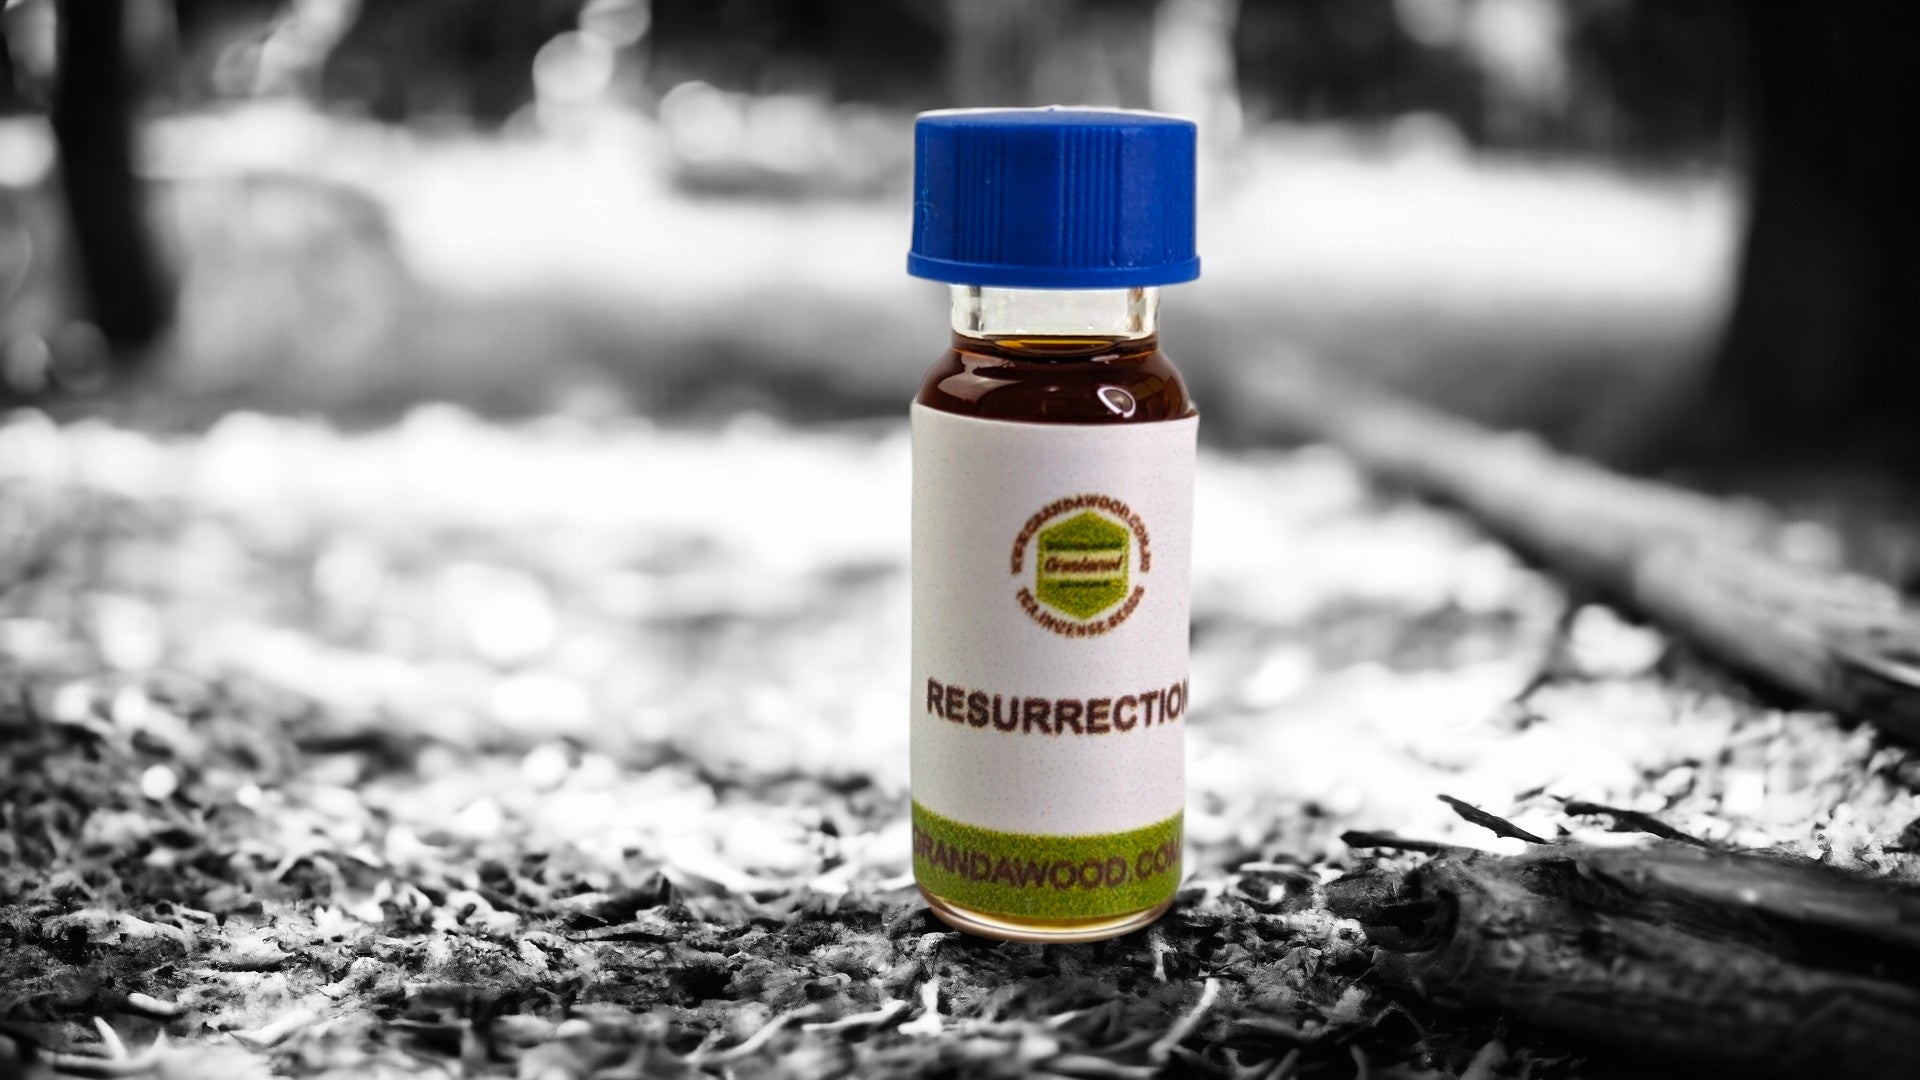 *New* The resurrection - super leathery Cultivated Agarwood Oil